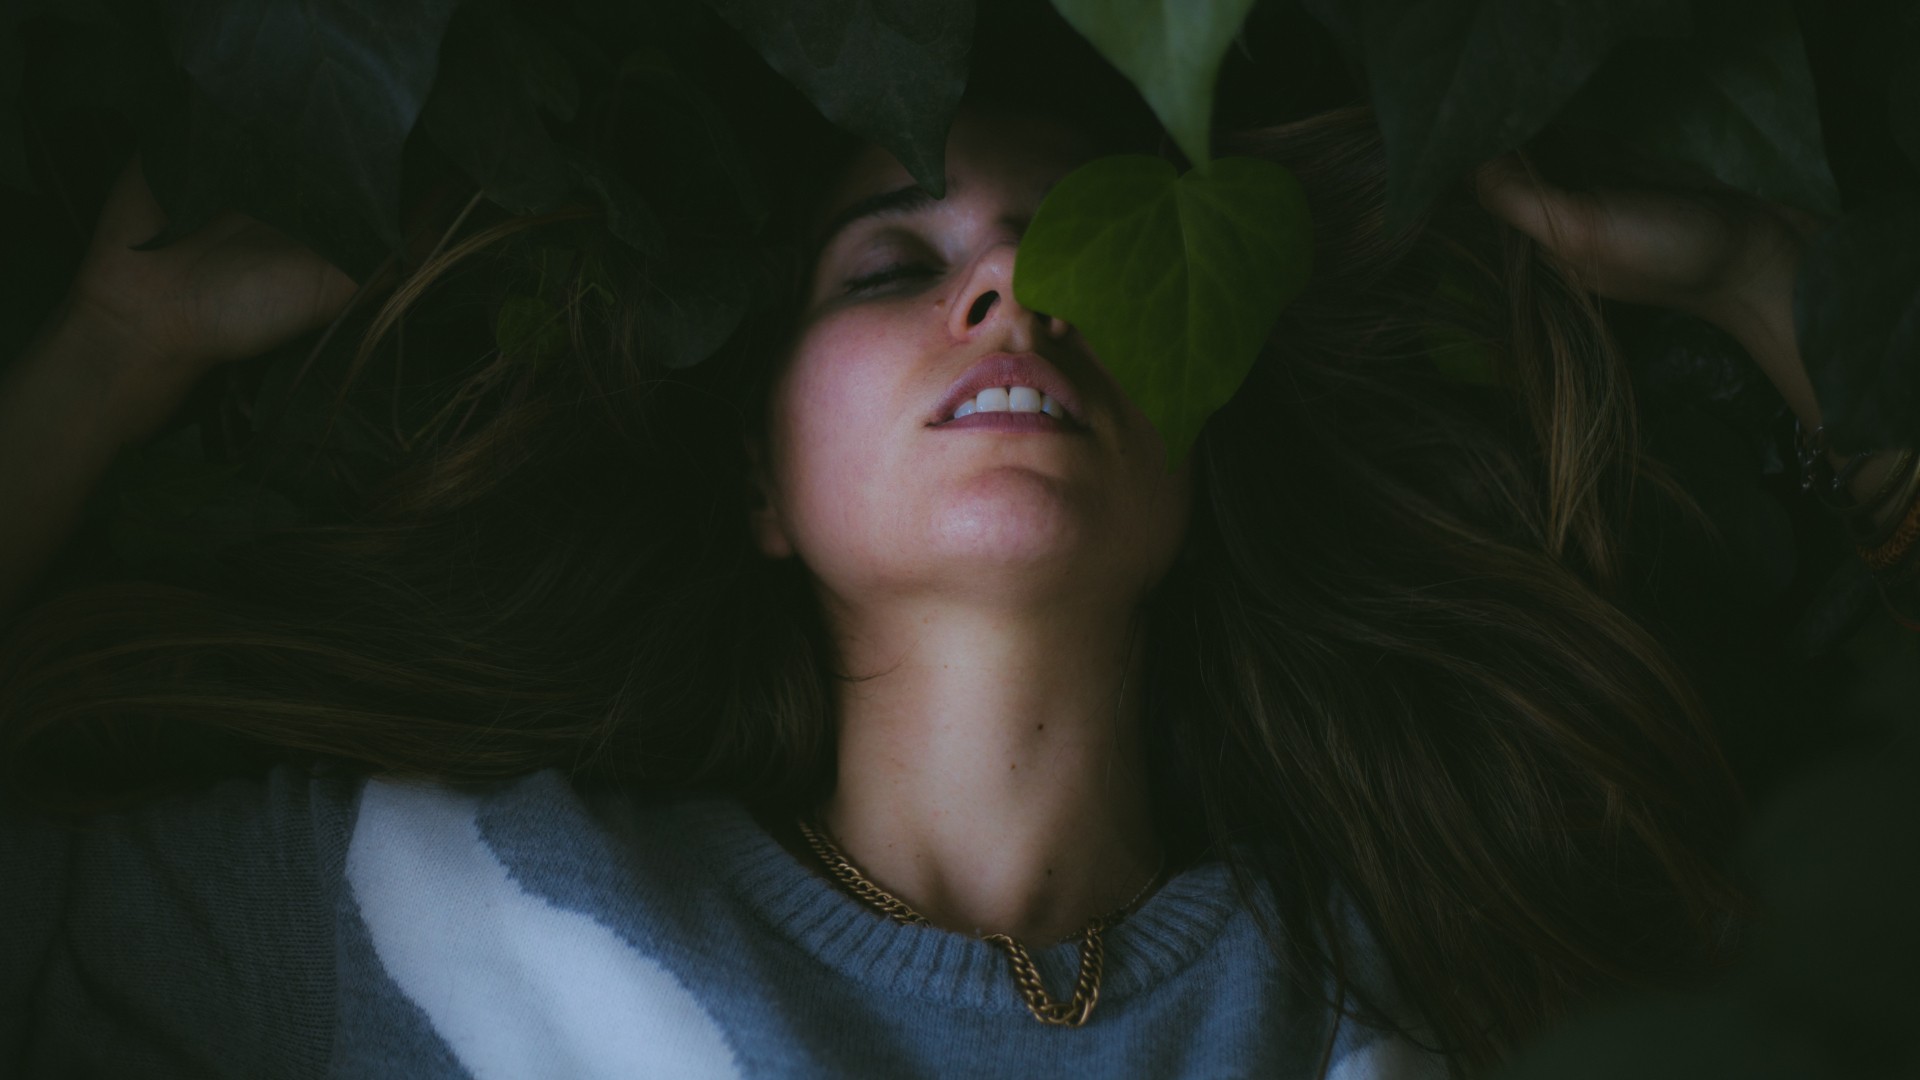 People 1920x1080 leaves plants closed eyes face women model brunette diffused long hair sweater closeup